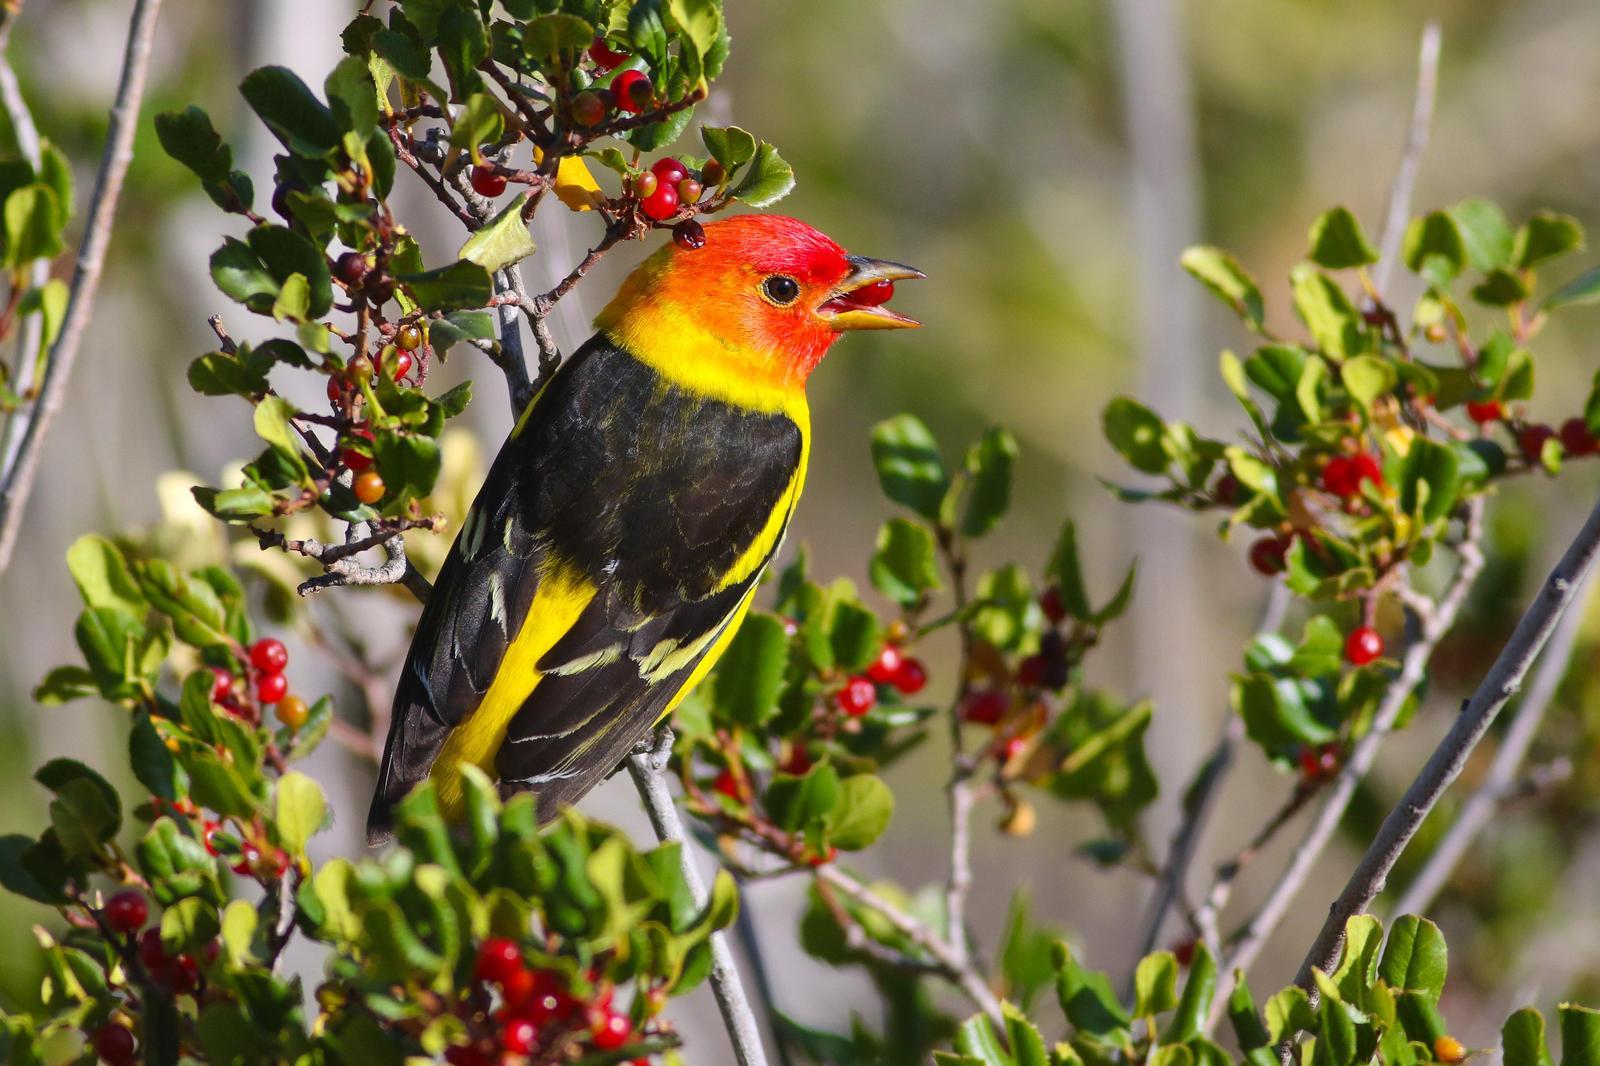 Western Tanager Photo by Tom Ford-Hutchinson